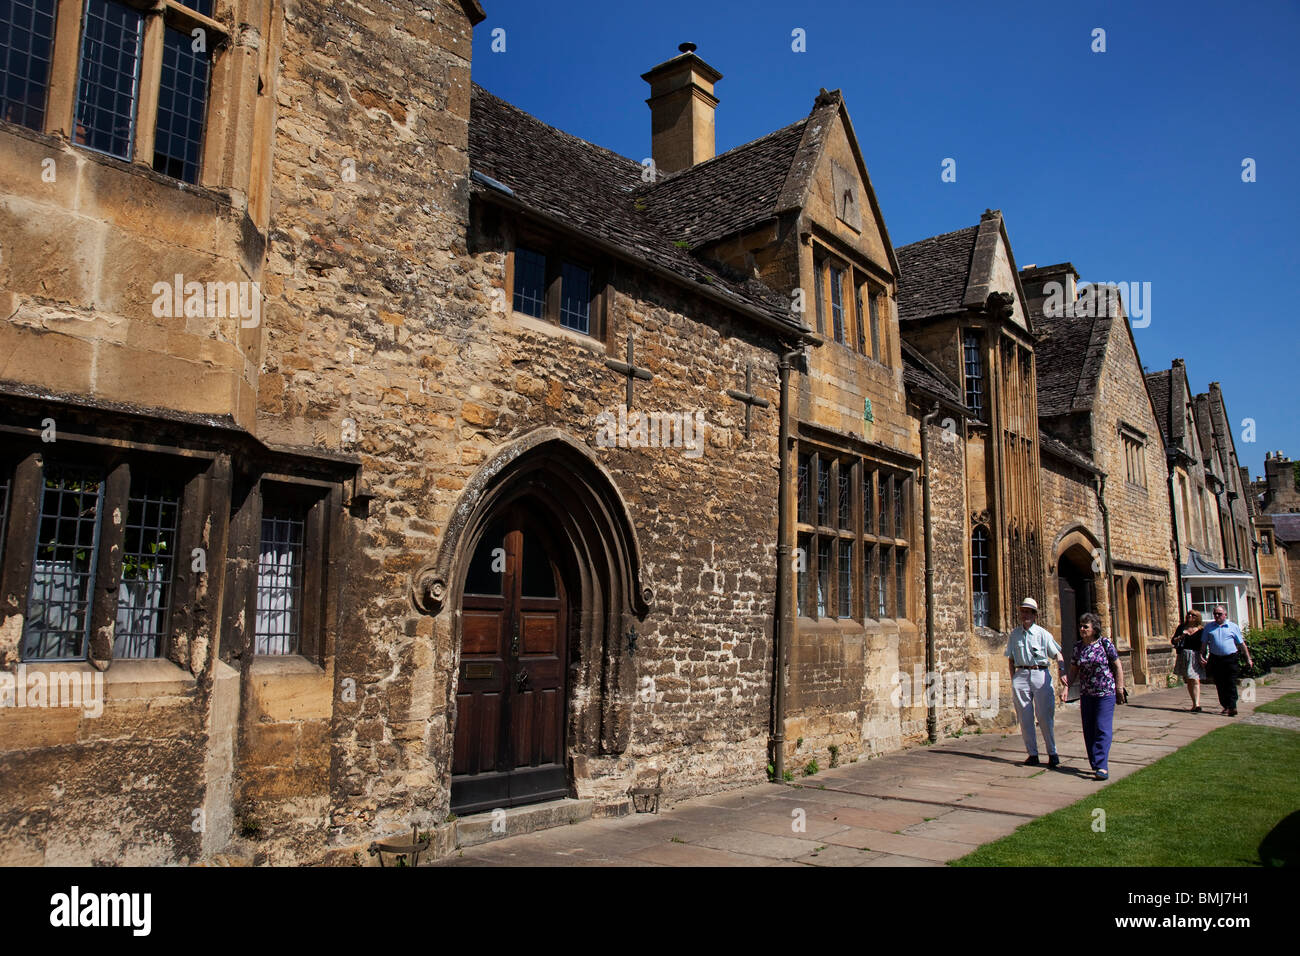 Local stone buildings in Chipping Campden.The Cotswolds, Gloucestershire, UK. Stock Photo